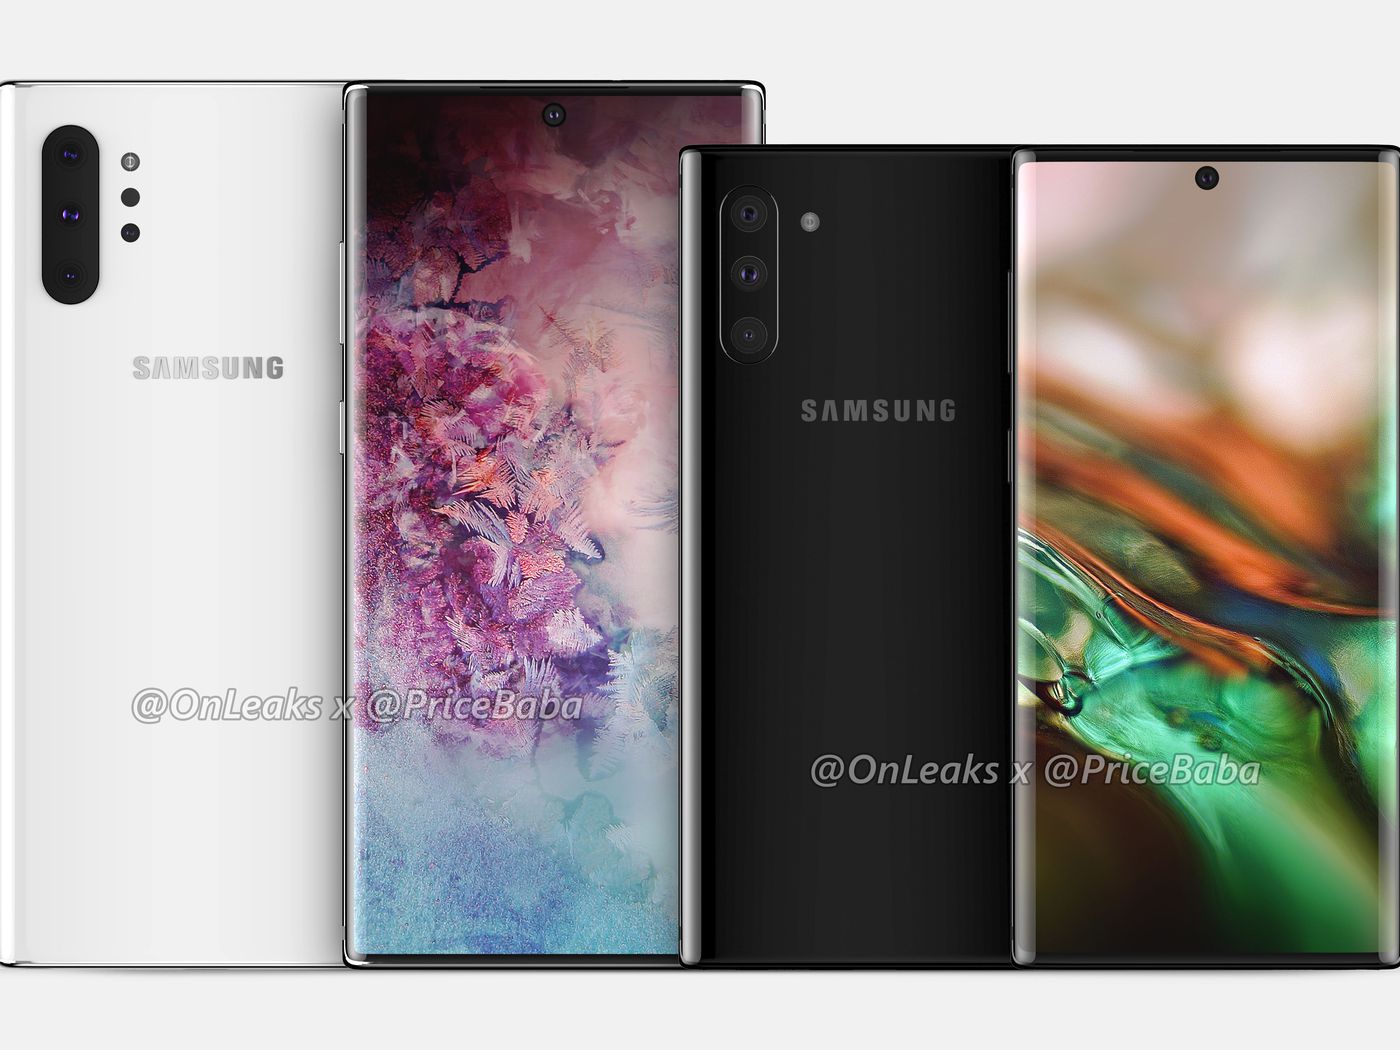 Samsung Galaxy Note 10 Renders Reveal Giant Screen And No Headphone Jack The Verge